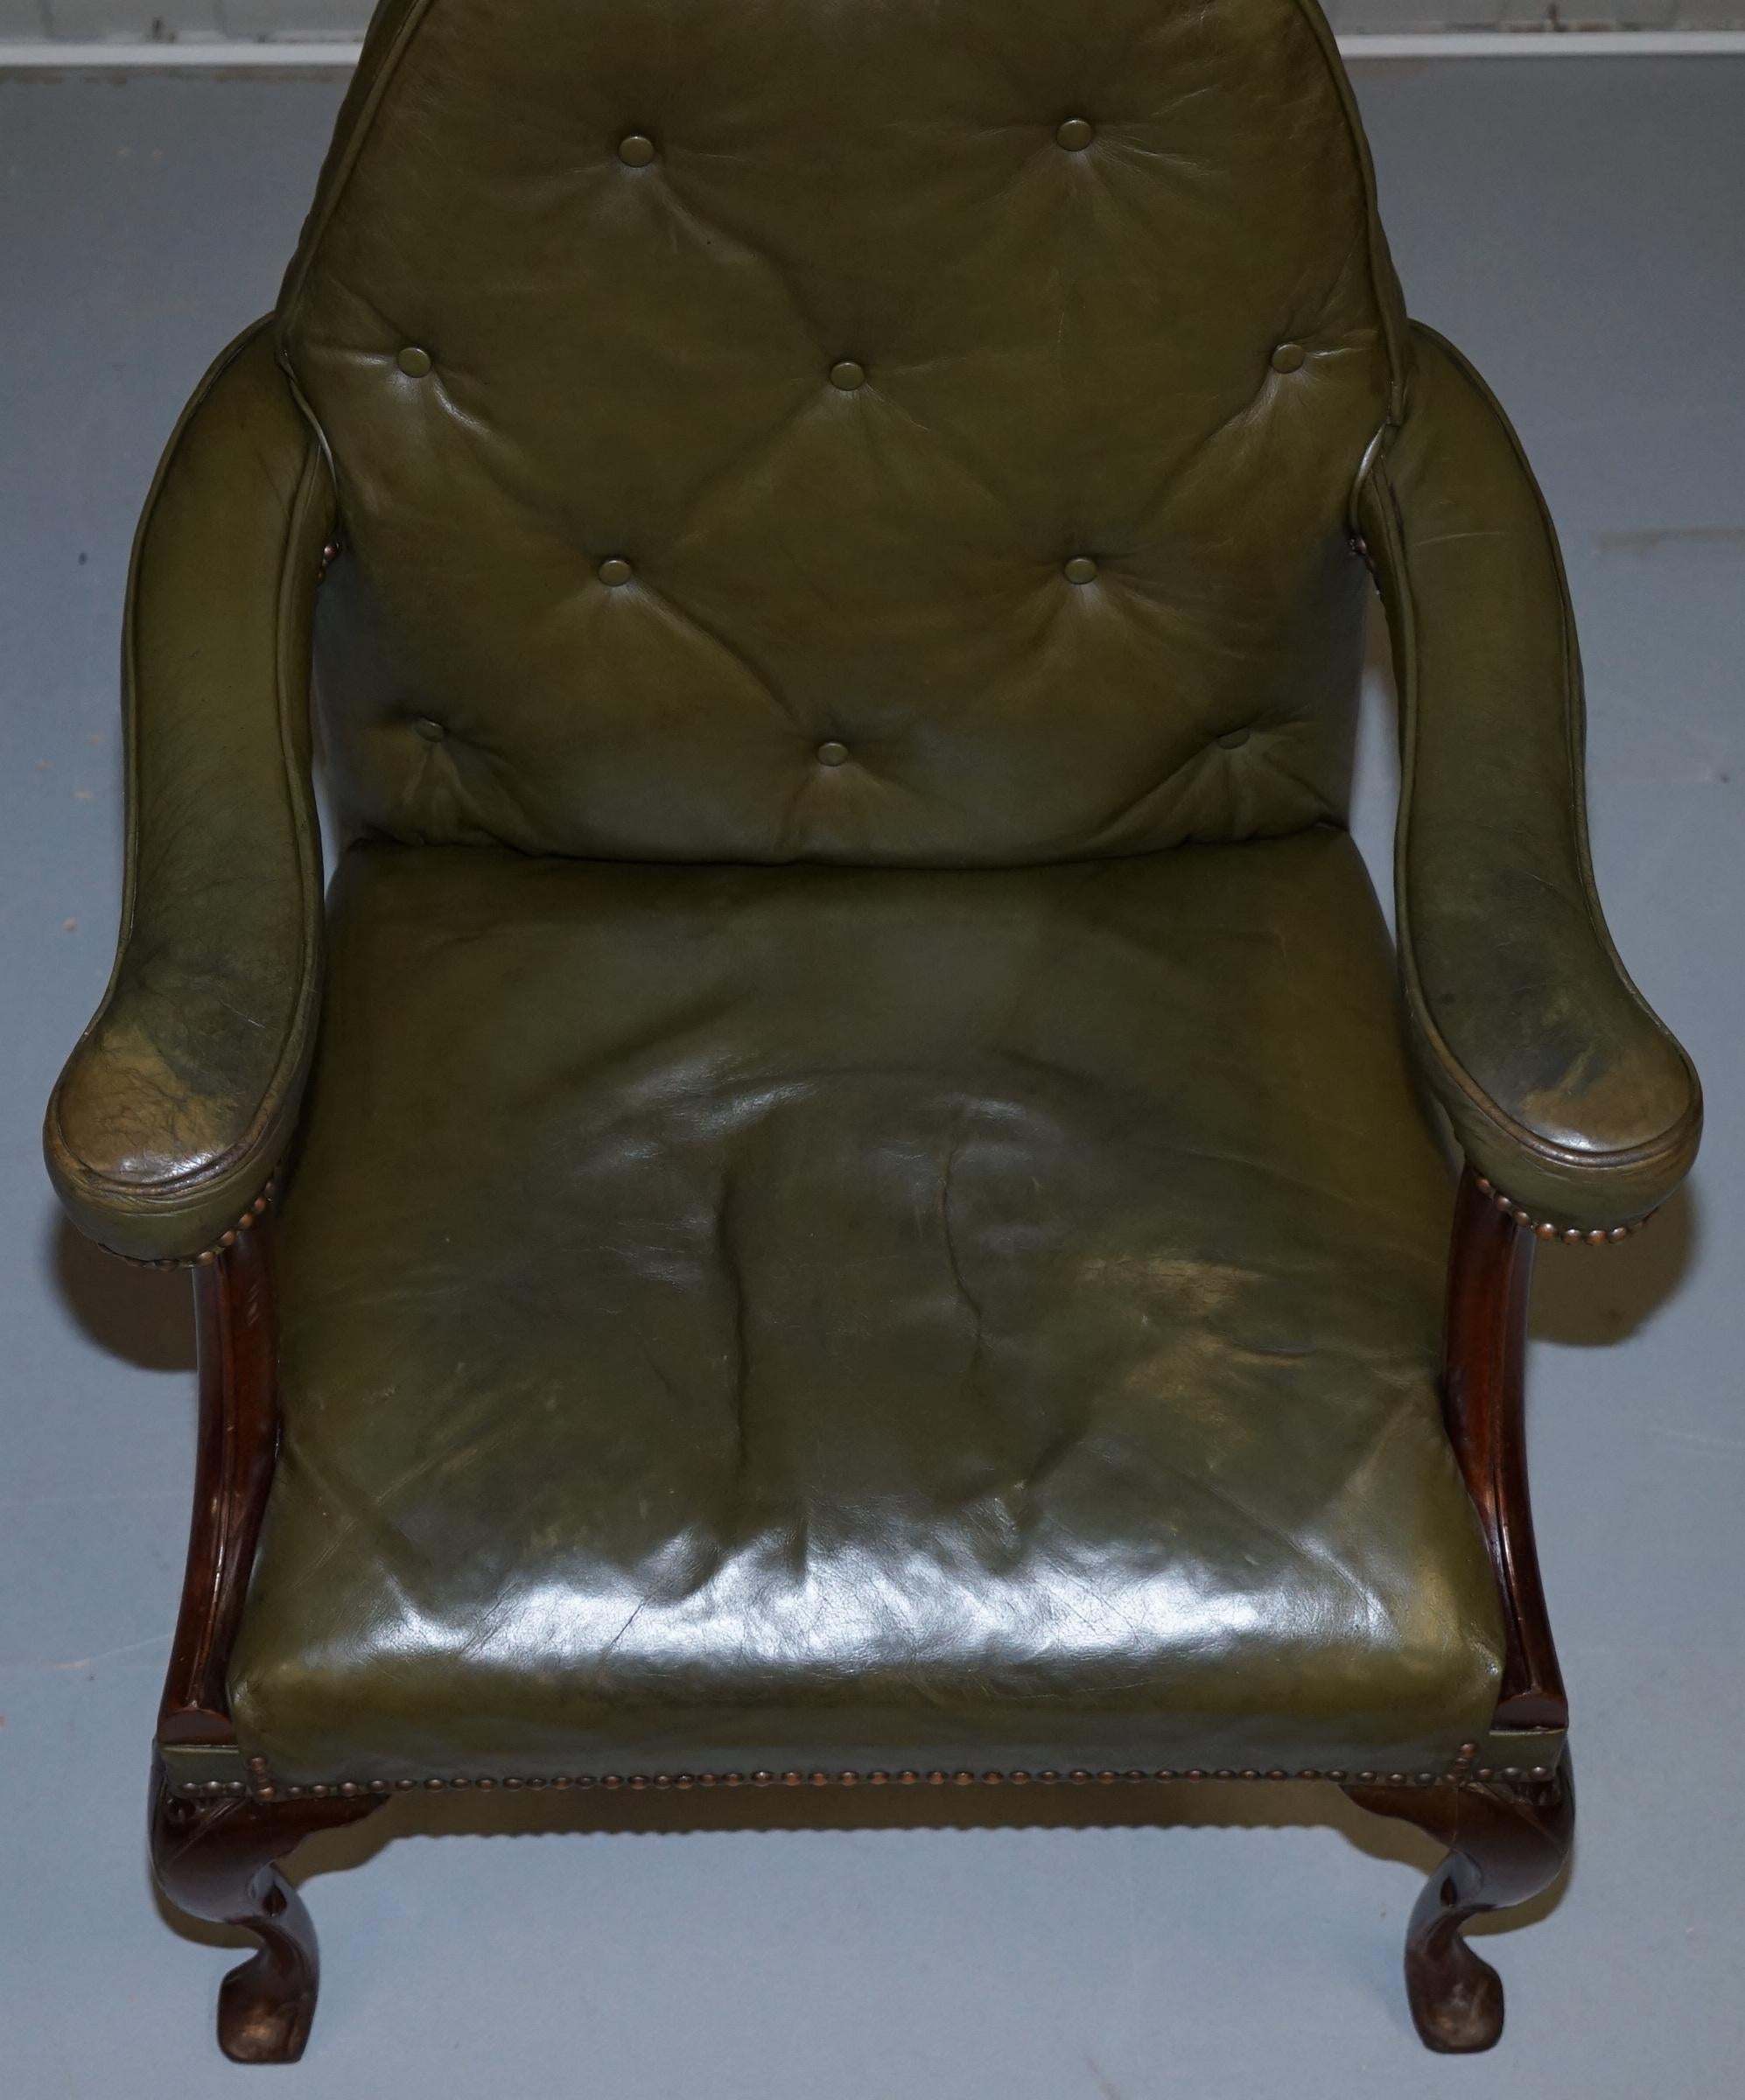 Hand-Crafted Gothic Revival Georgian Irish Chesterfield Leather Carver Armchair, circa 1800 For Sale